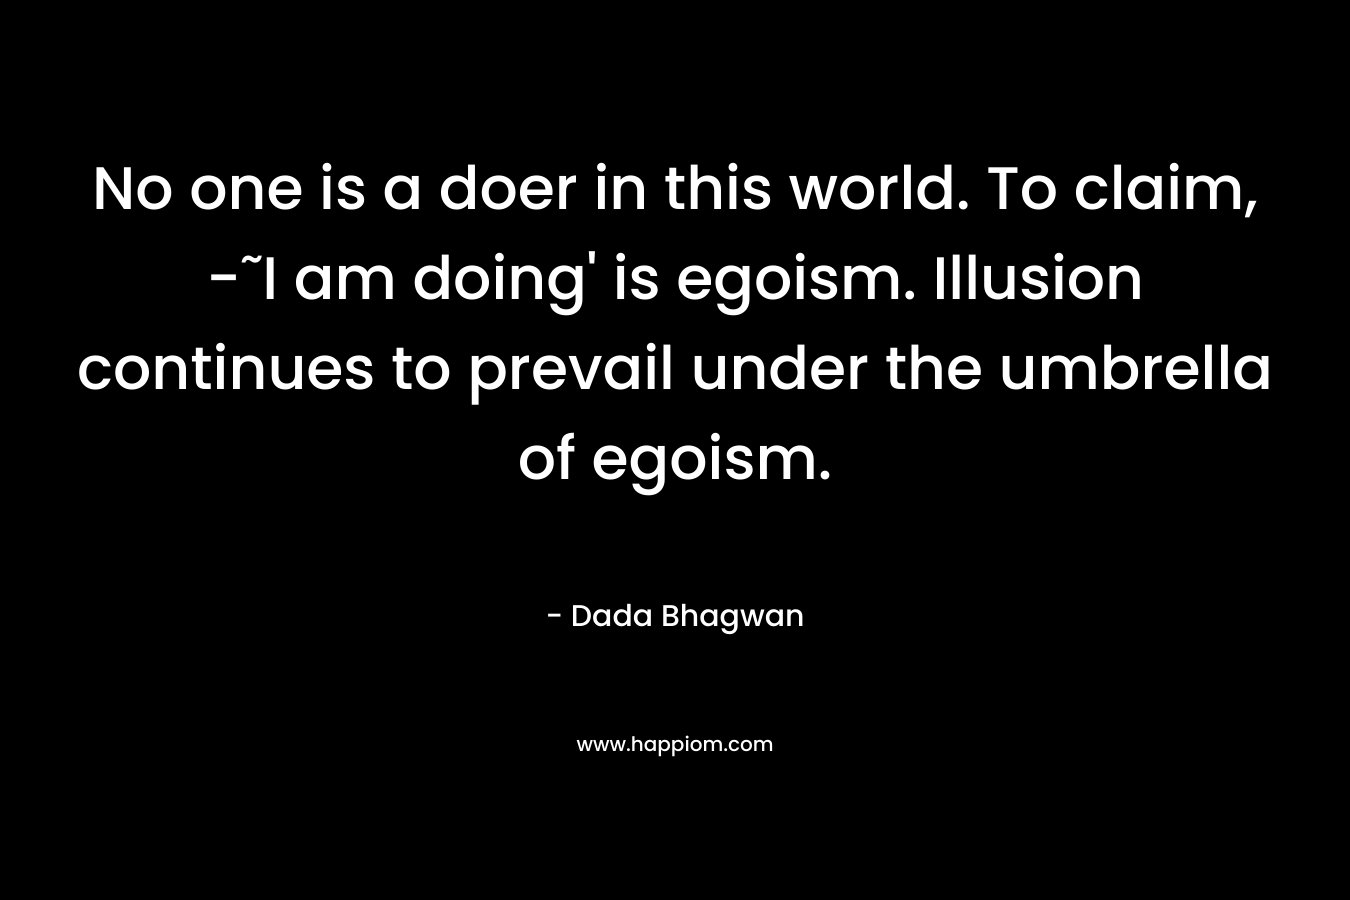 No one is a doer in this world. To claim, -˜I am doing’ is egoism. Illusion continues to prevail under the umbrella of egoism. – Dada Bhagwan